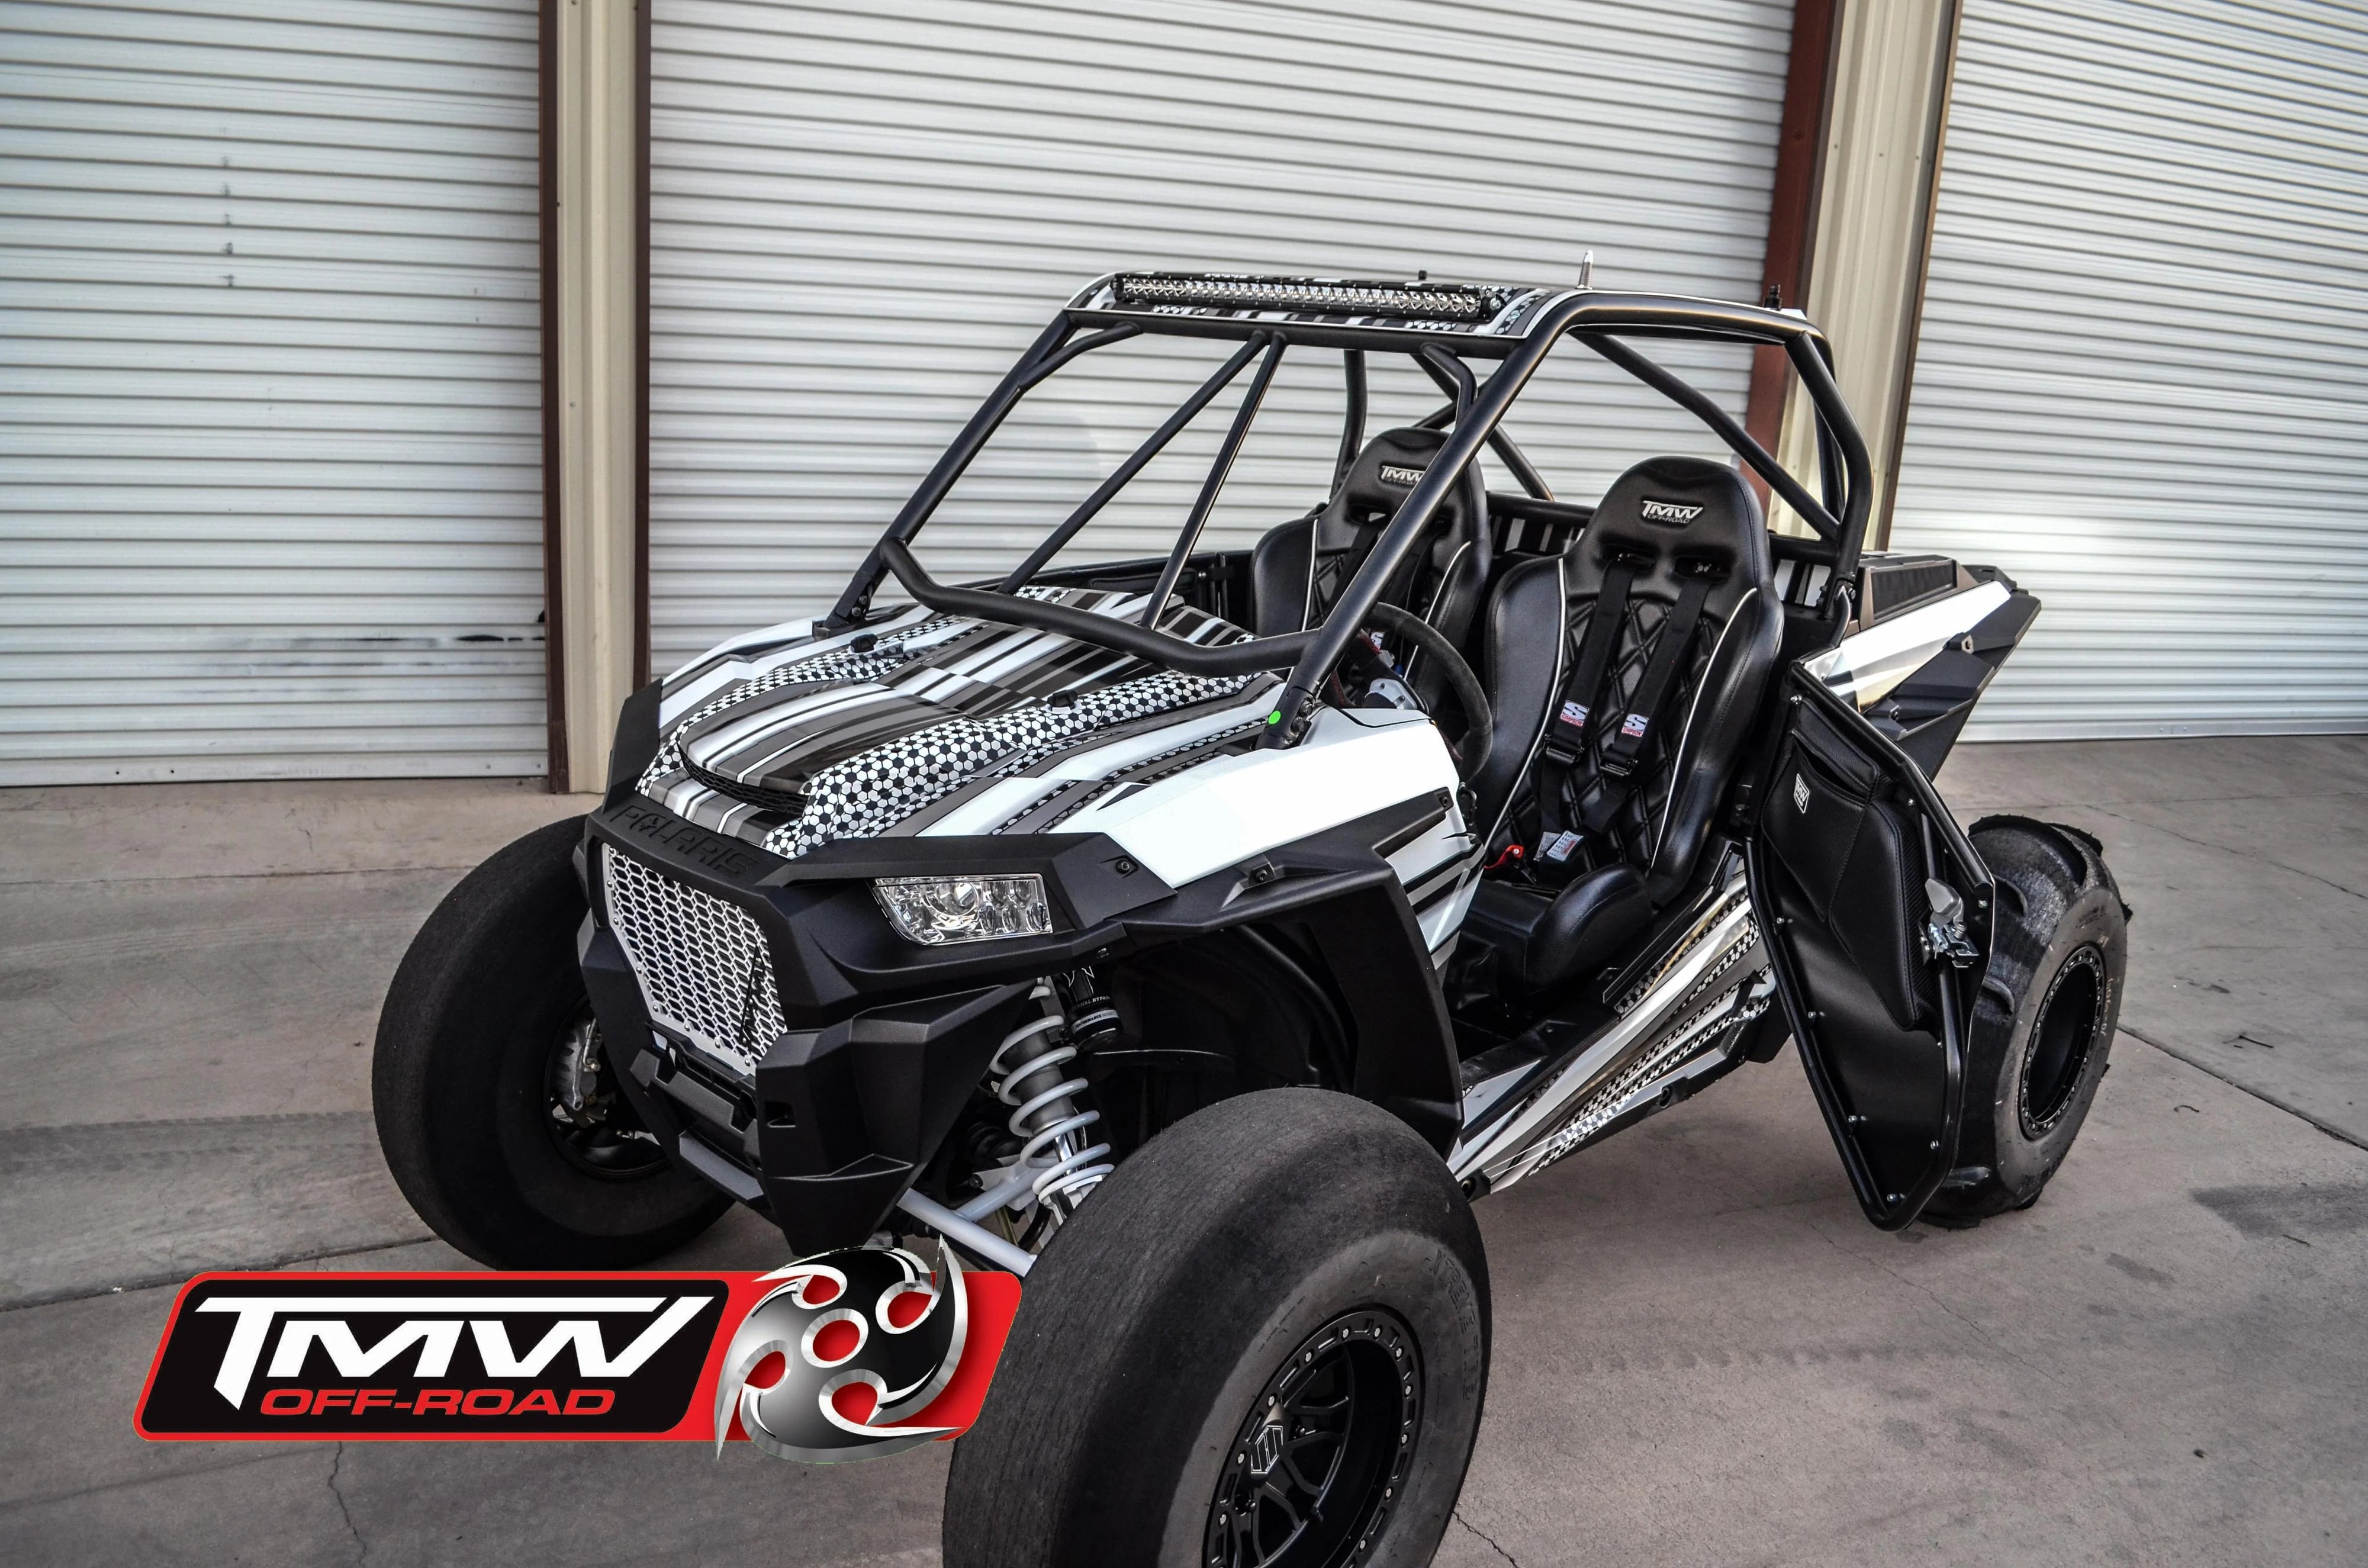 Dune edition speed cage 2 seater (fits 2018 and older RZR 1000 models) - G Life UTV Shop Parts